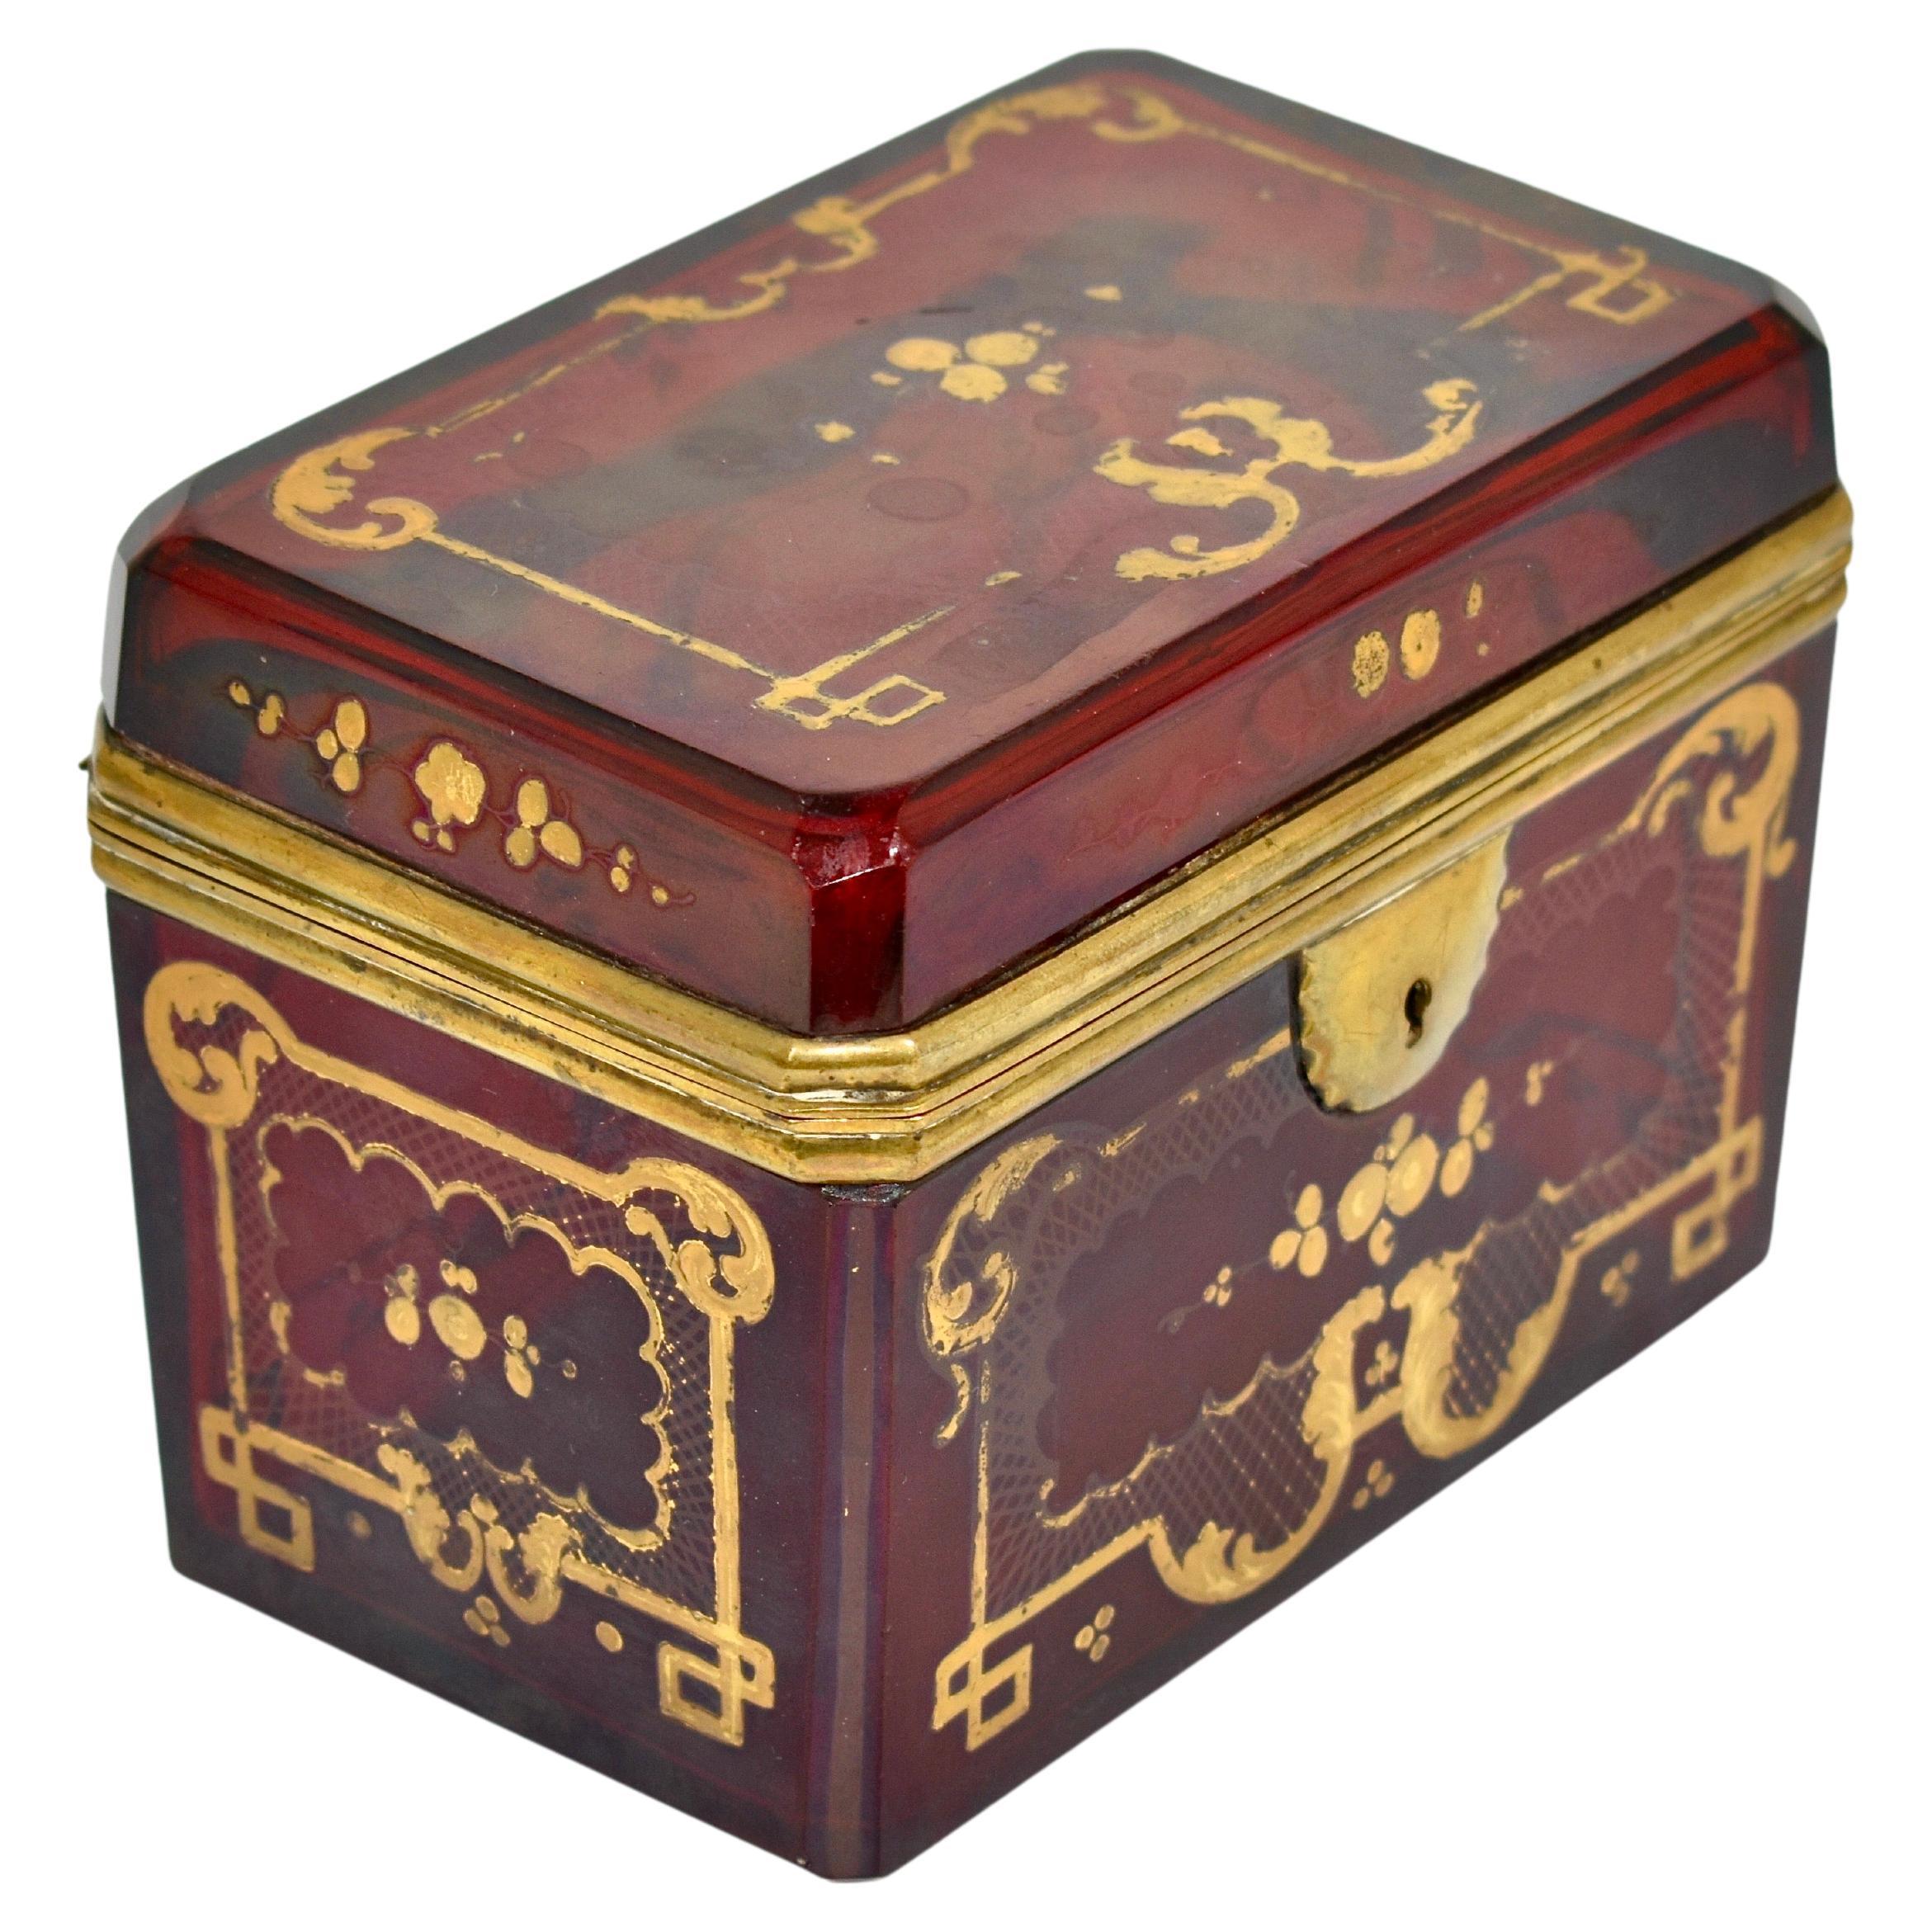 Fine jewelery casket box

High quality ruby red glass and hinged bronze mounts

Decorated all around with gilded enamel decoration

Bohemia, 19th century.